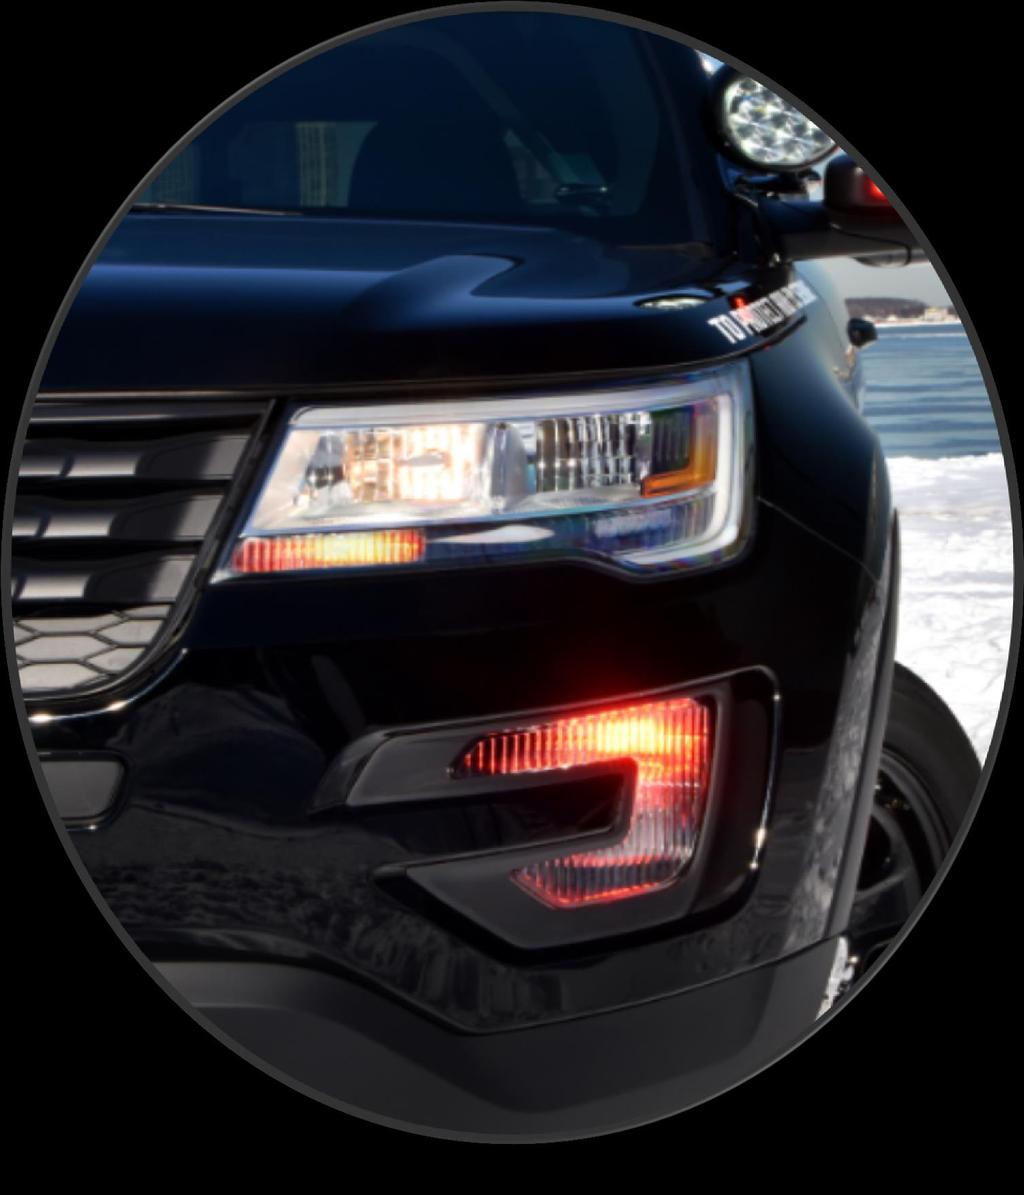 FORWARD WARNING AUX LIGHTS (Order Code - 21L) FRONT WARNING AUXILIARY LIGHT Front